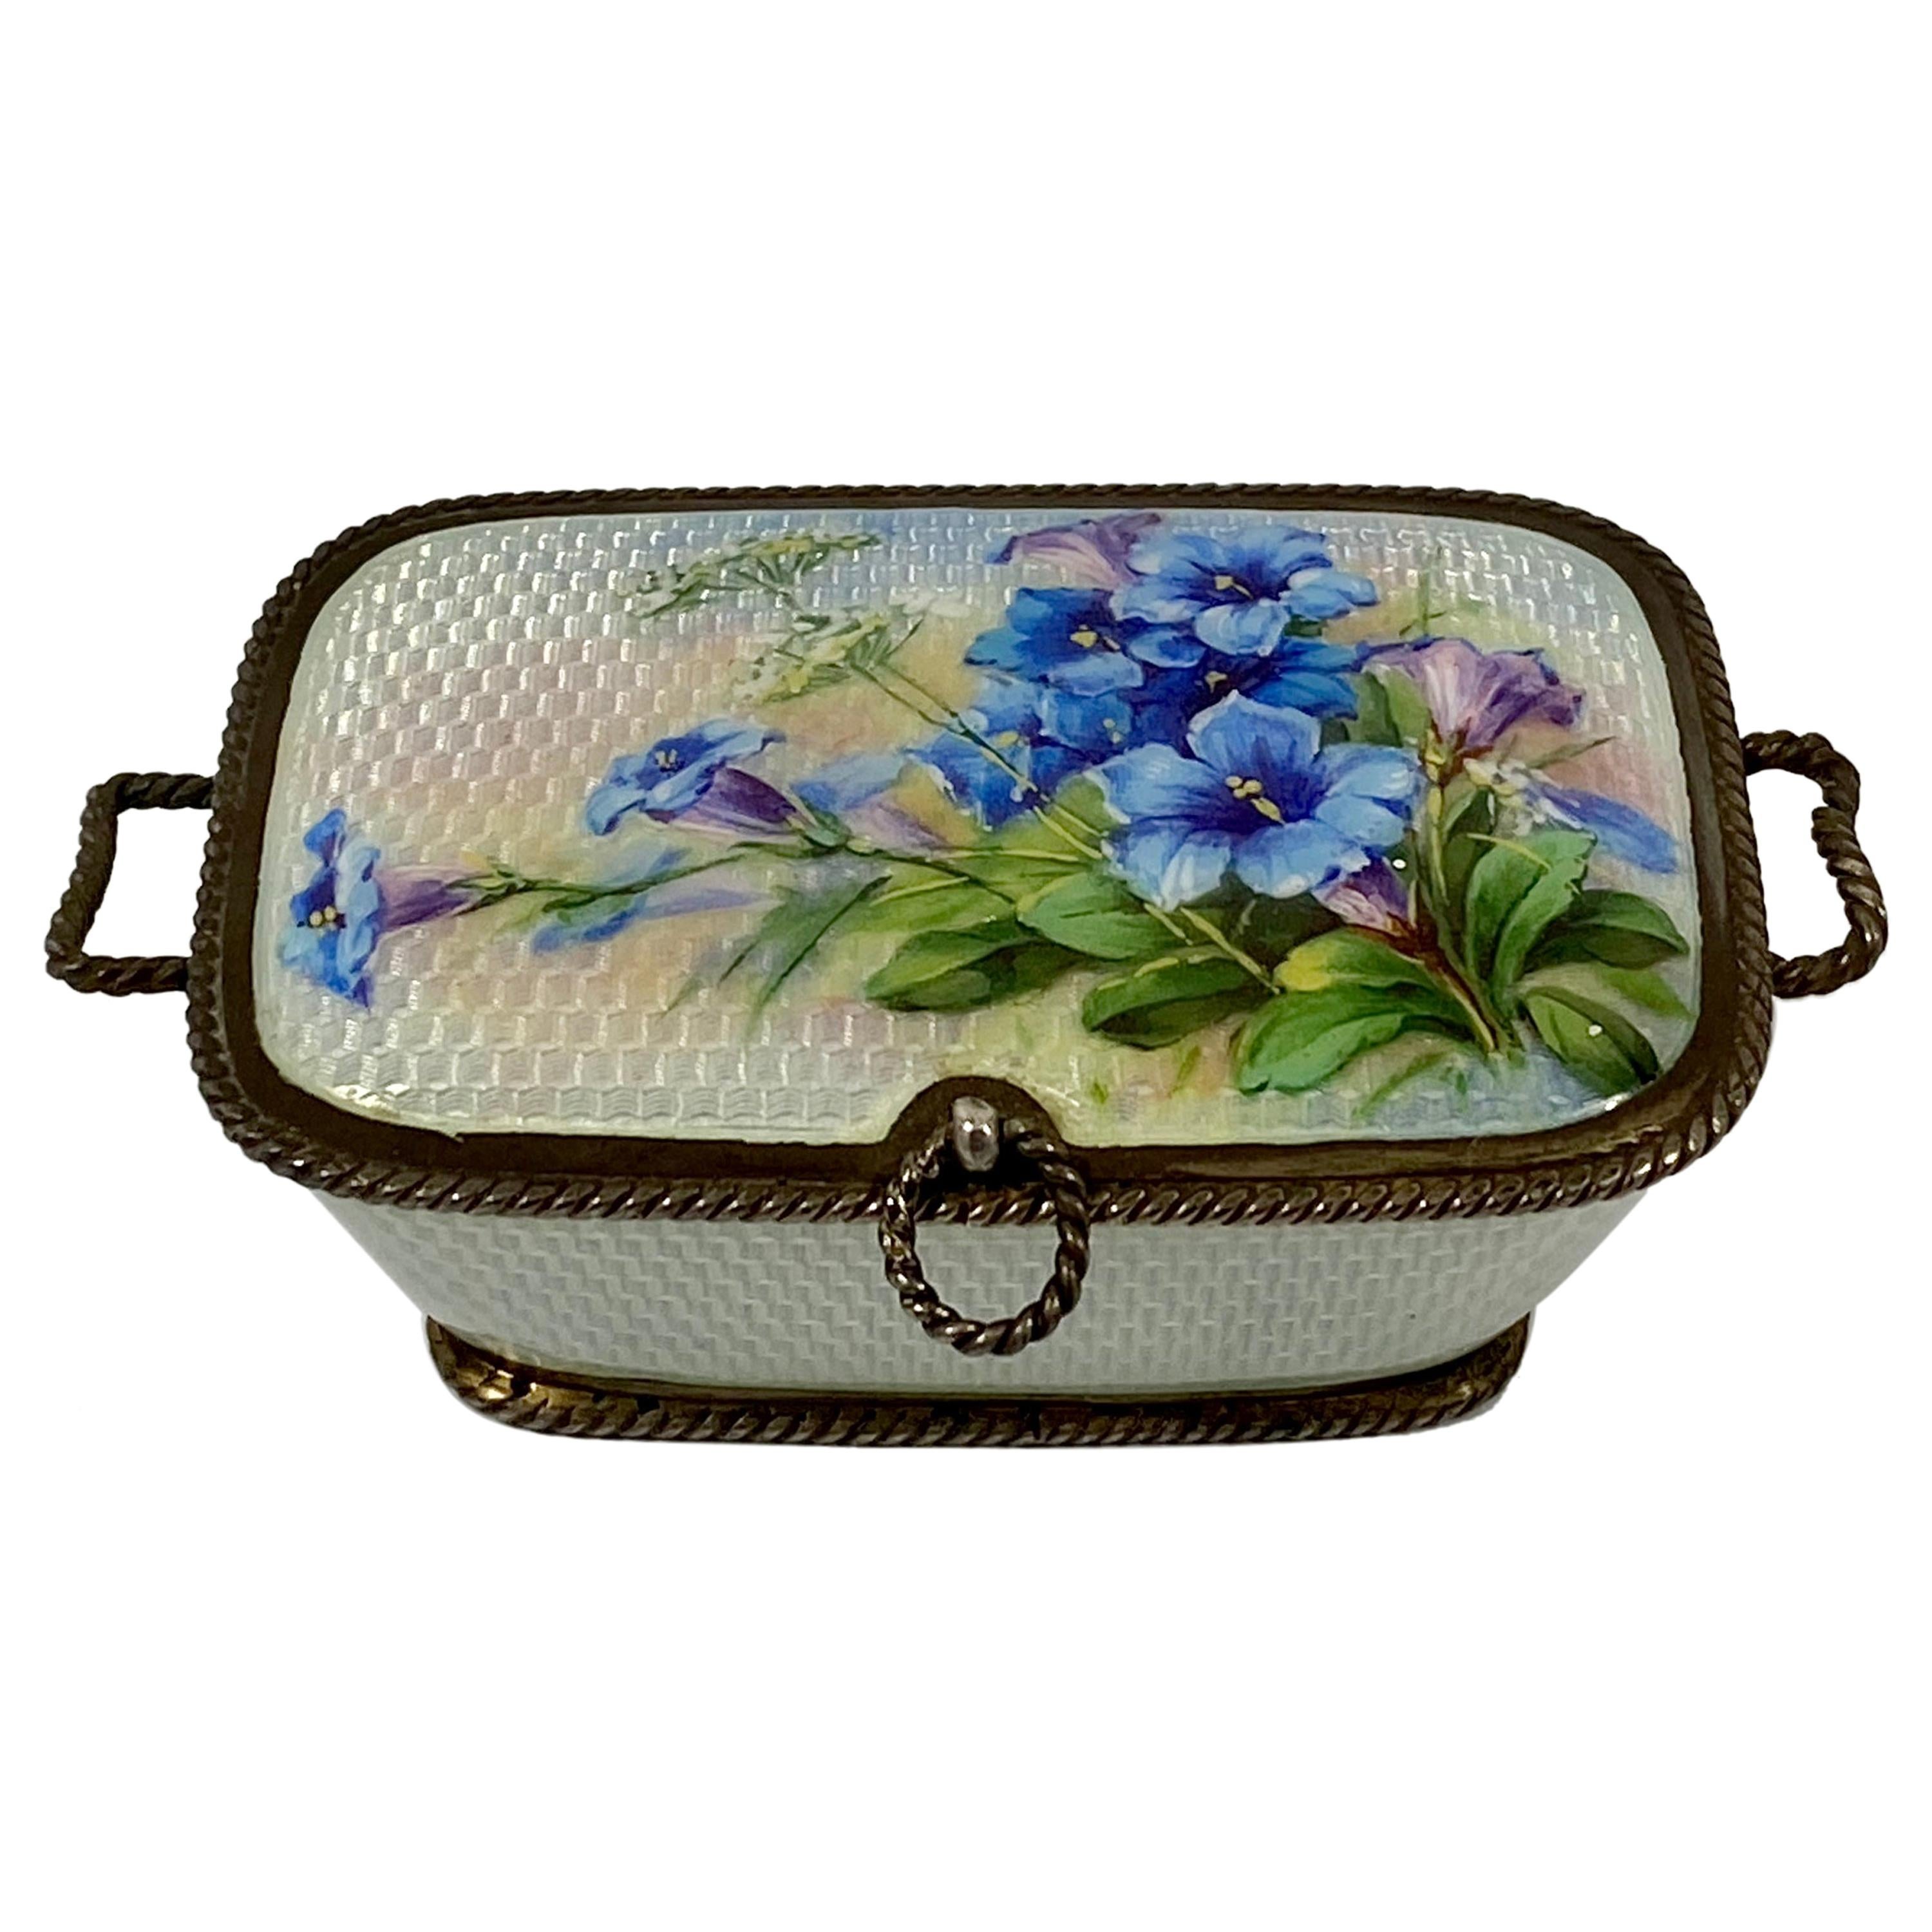 Silver and Enamel Box, Dated 1911, Import Marks for Cohen & Charles